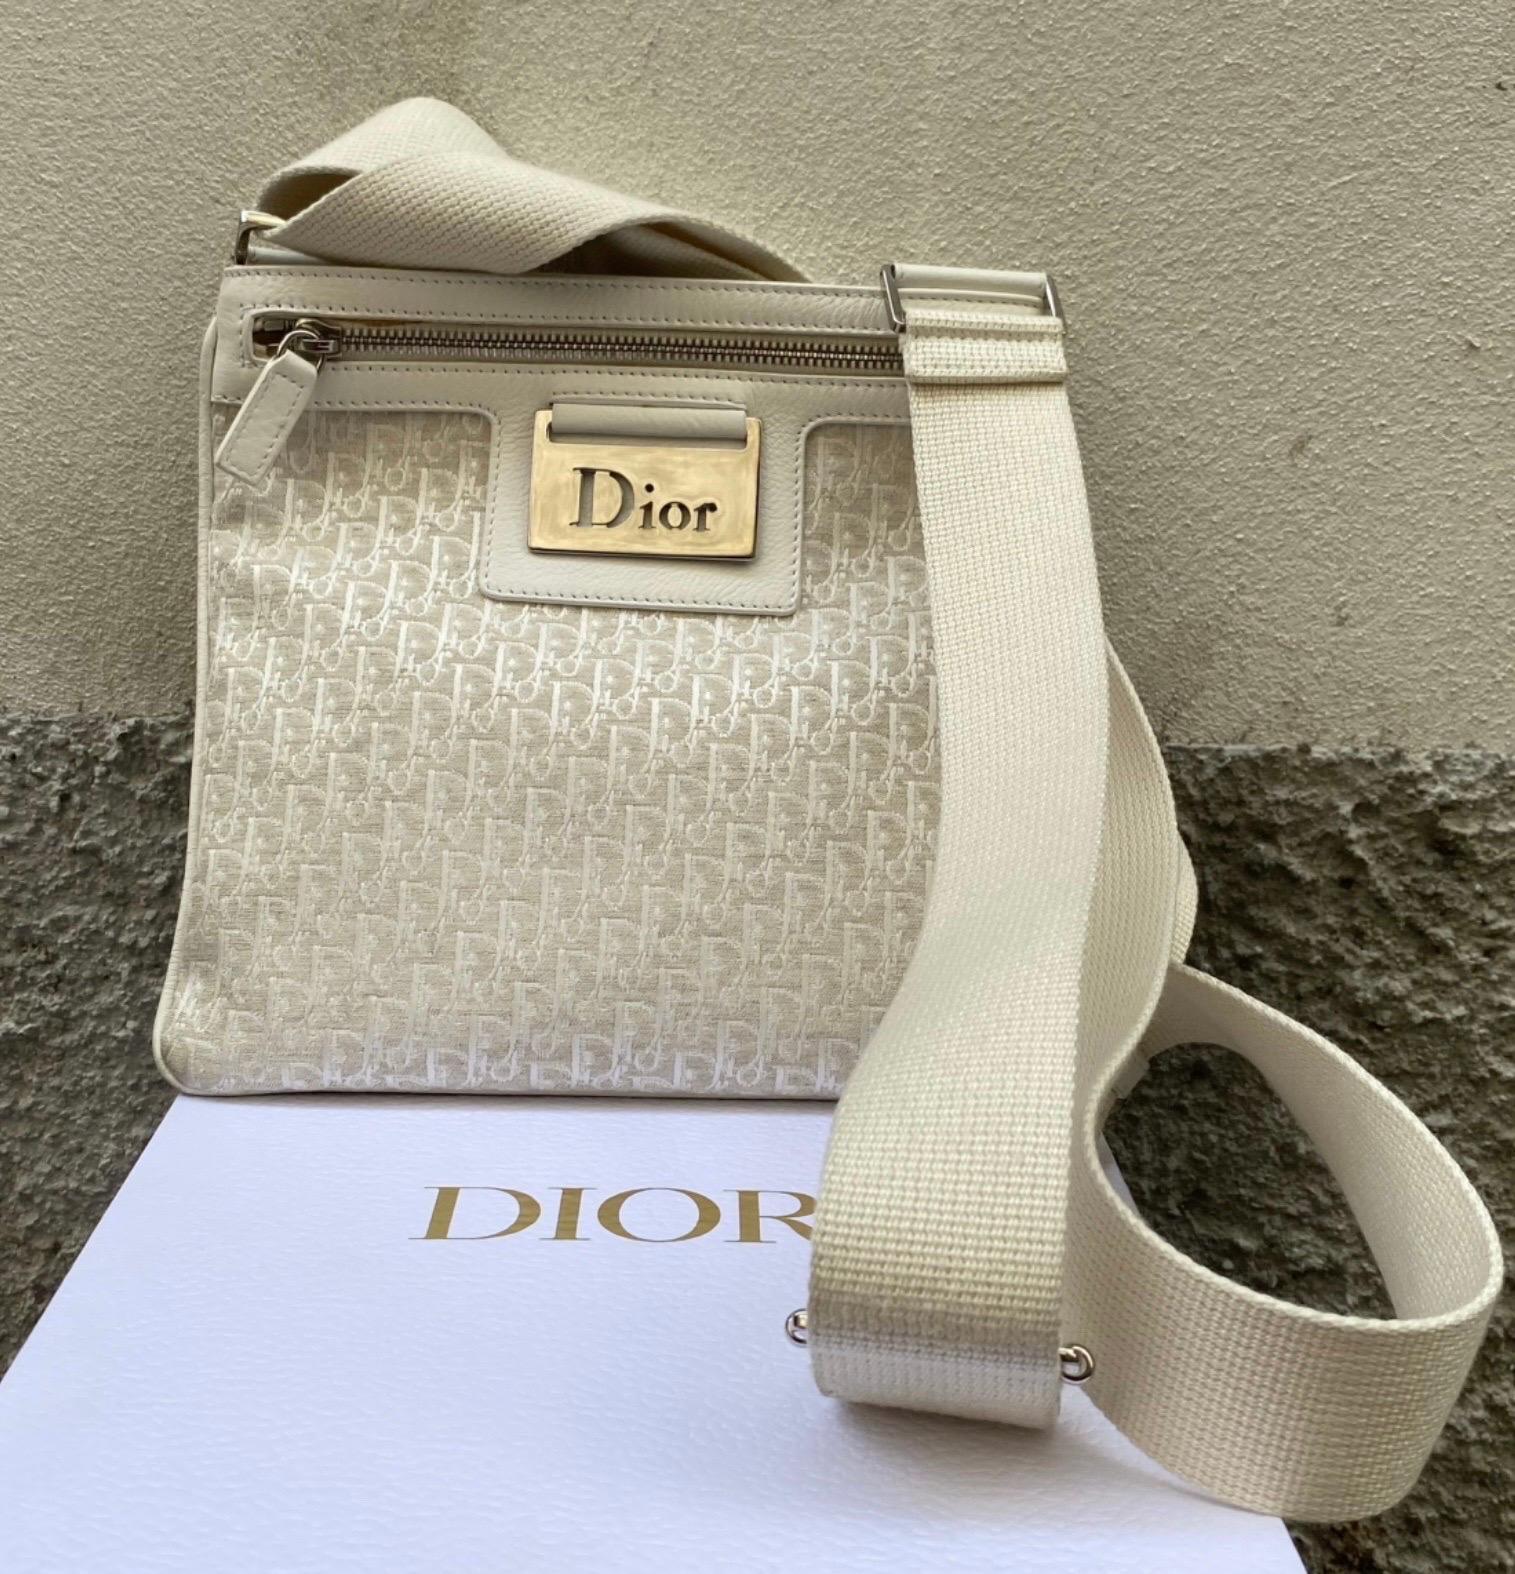 Dior monogram shoulder bag. 90s vibes.
Beige shades. Featuring shoulder strap, there are small stains as shown in the photos, measurements: length 22cm, height 22cm, depth 1cm, shoulder strap extension 90cm, with dusbag and box. Good general